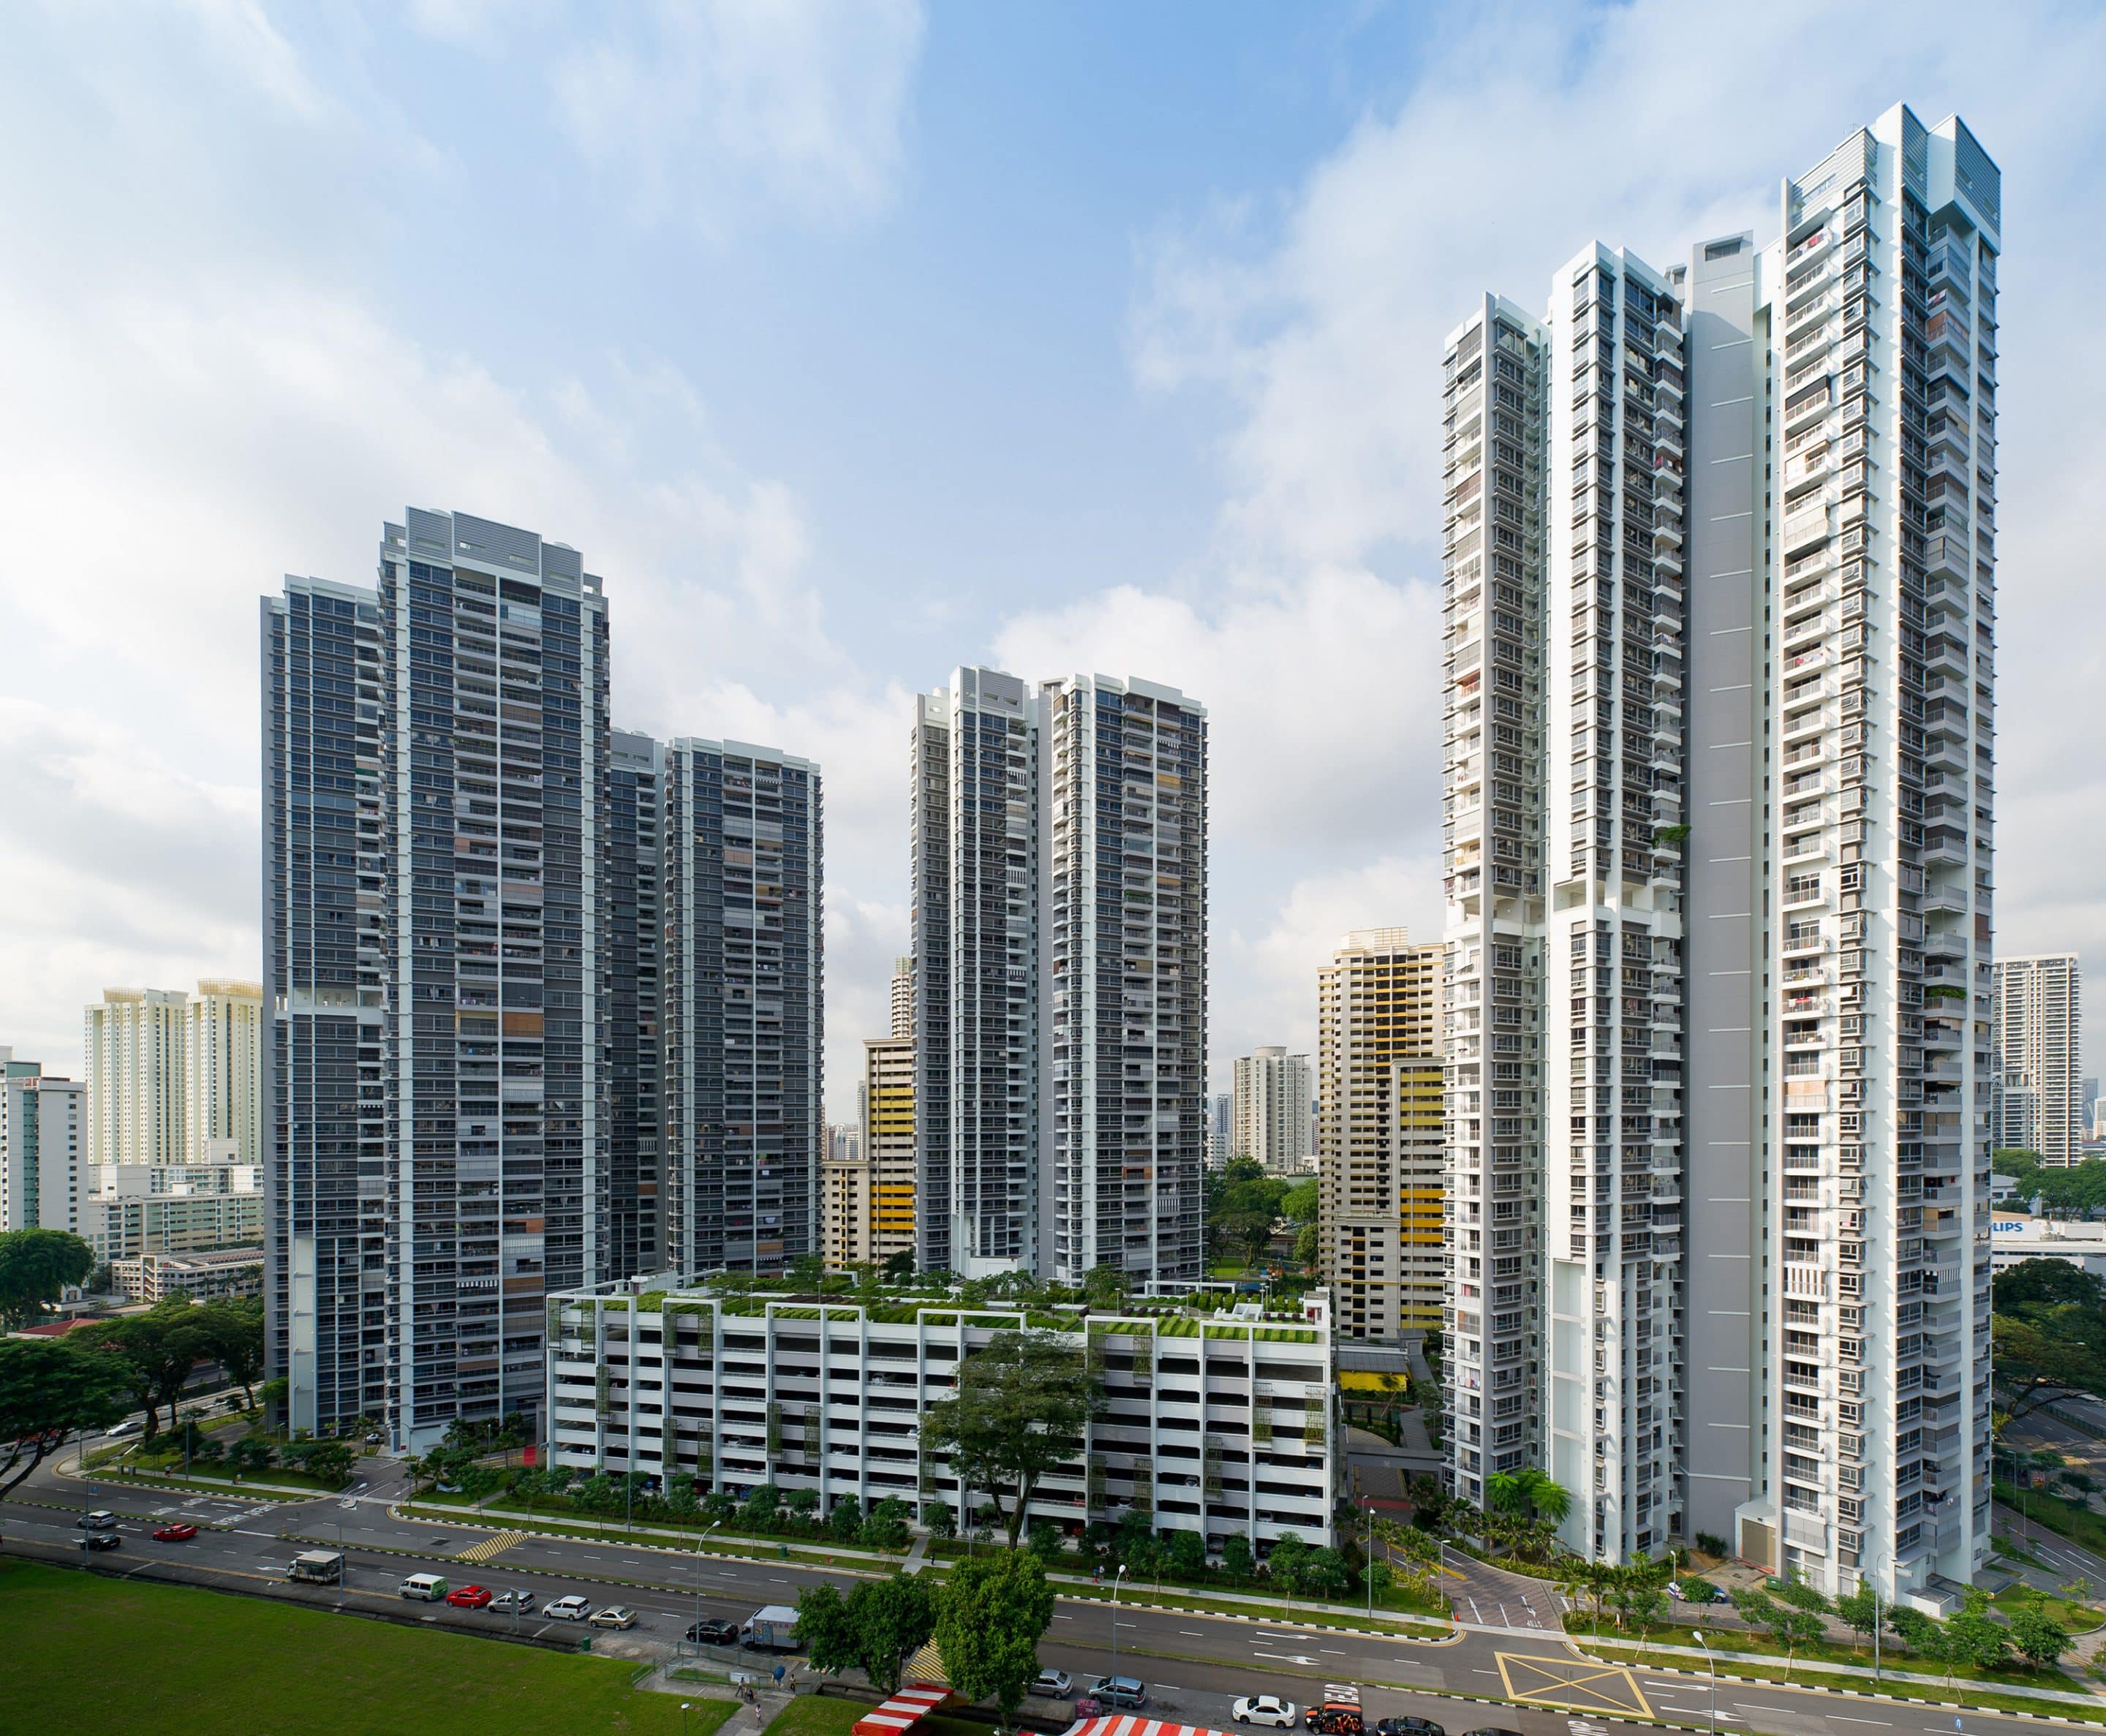 The Peak at Toa Payoh scaled